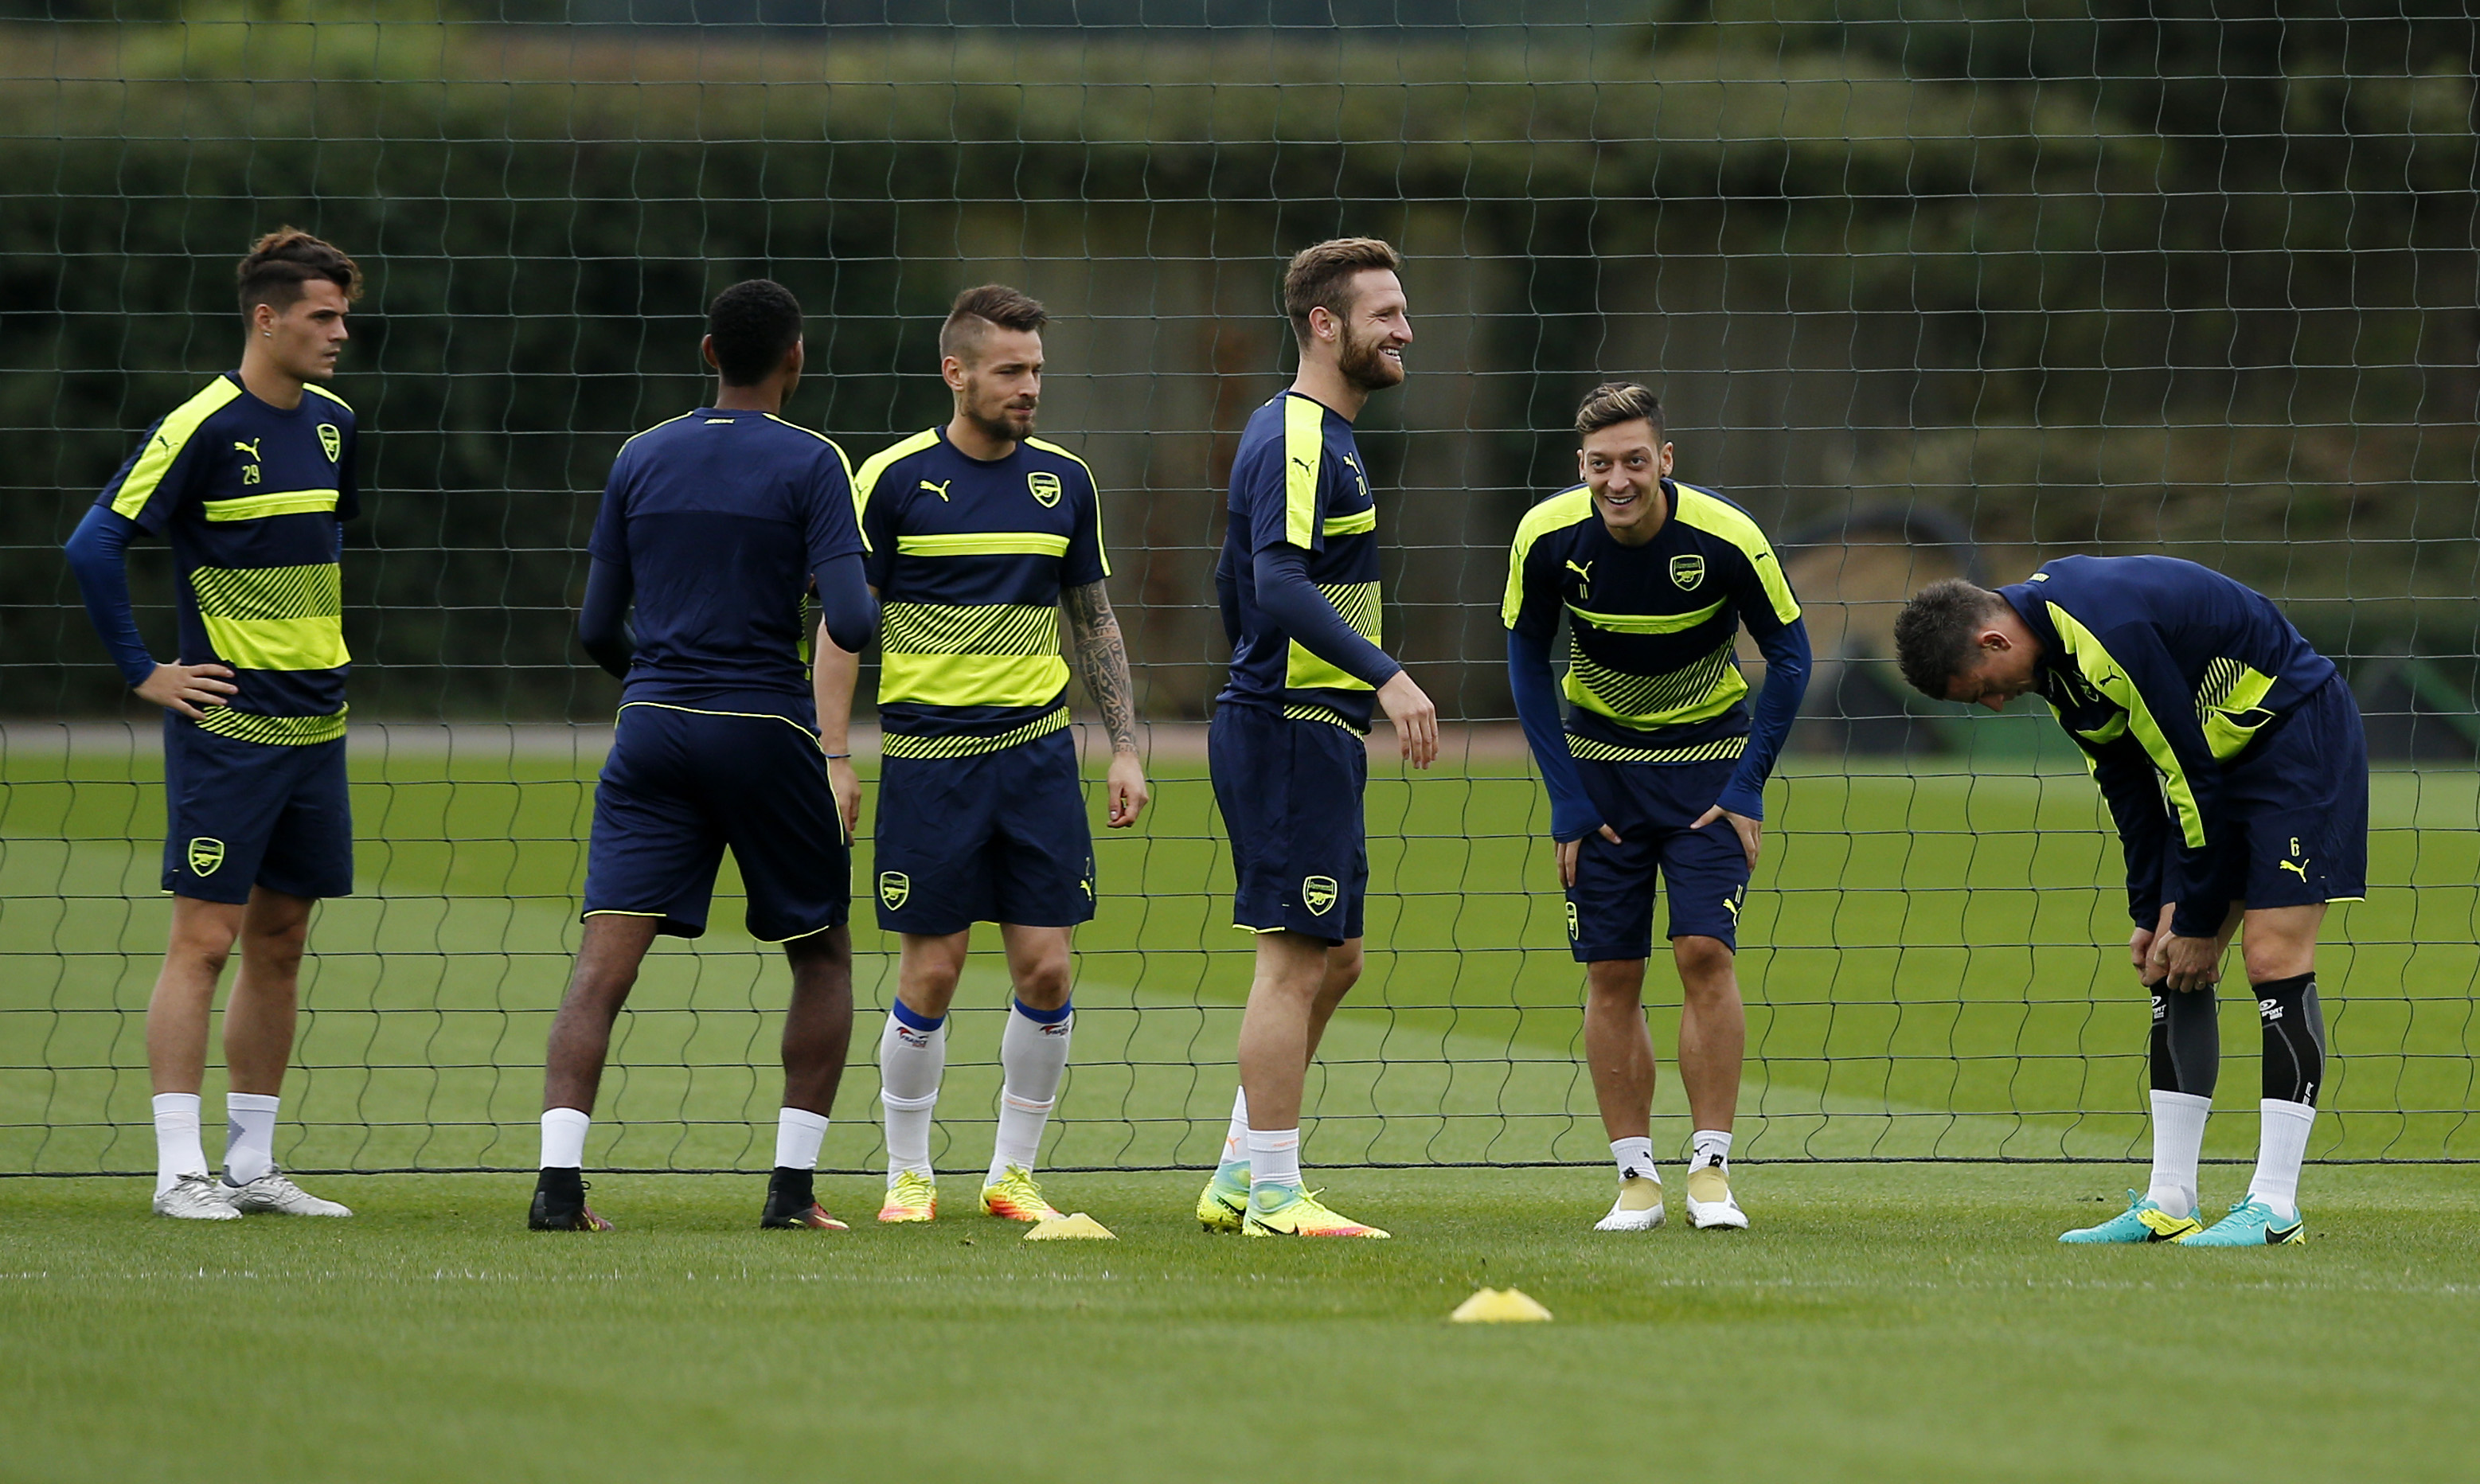 Britain Soccer Football - Arsenal Training - Arsenal Training Ground - 27/9/16 Arsenal's Mesut Ozil (2nd R) during training Action Images via Reuters / Andrew Couldridge Livepic EDITORIAL USE ONLY.